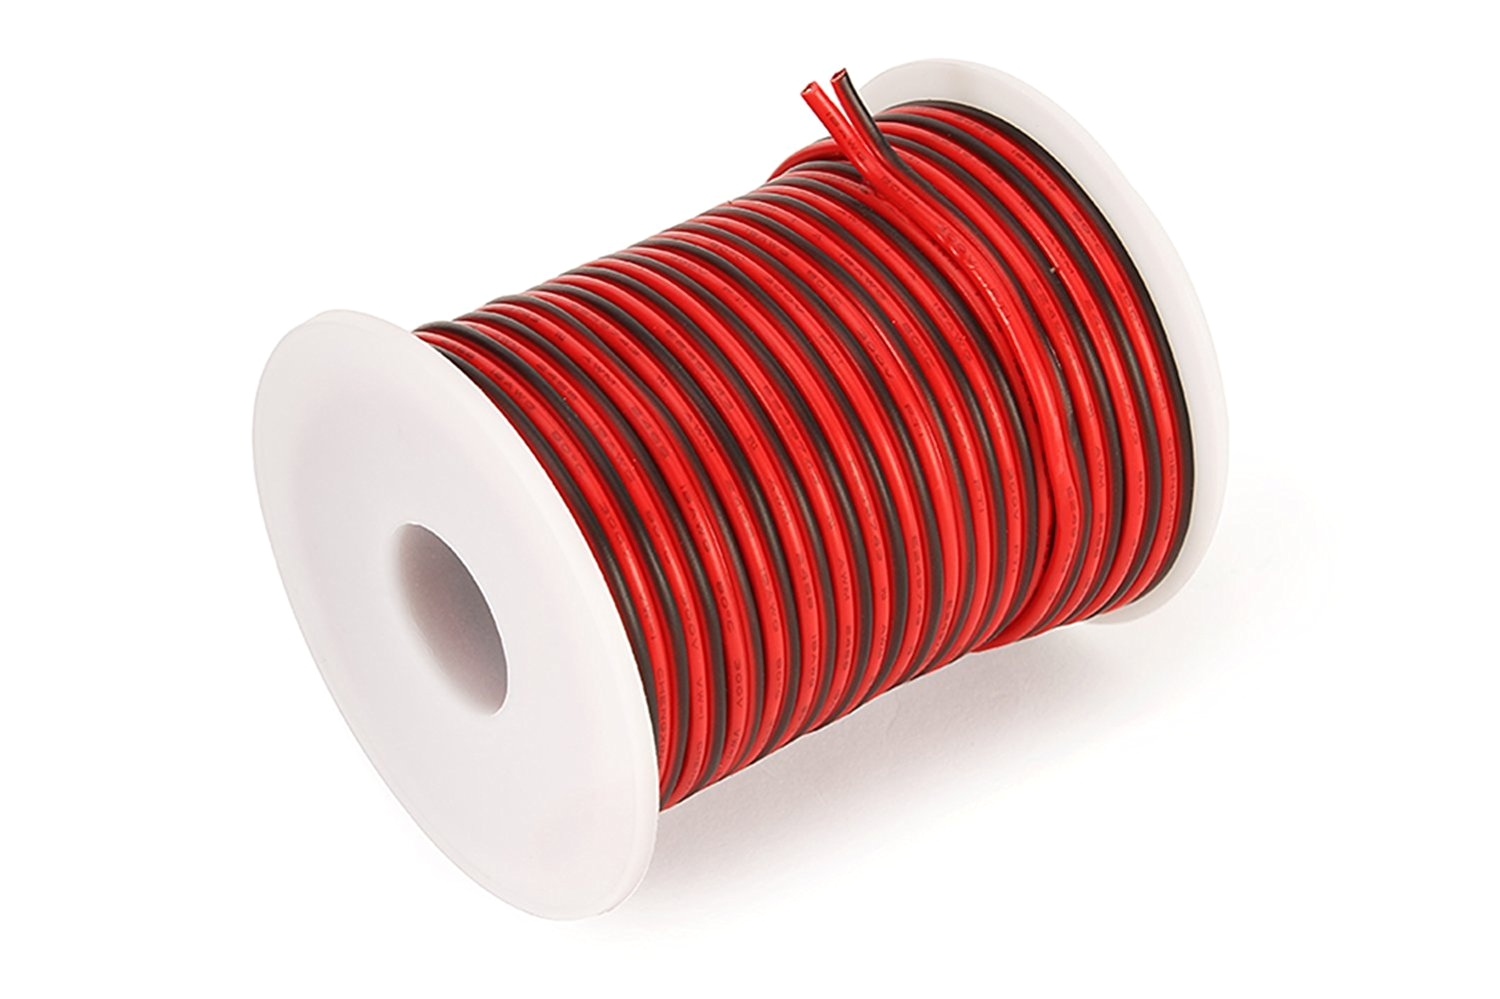 c able 50foot 18 gauge hookup electrical 2 red black wire led strip extension wire awg copper flexible stranded wire cord welding leads cable conductor for